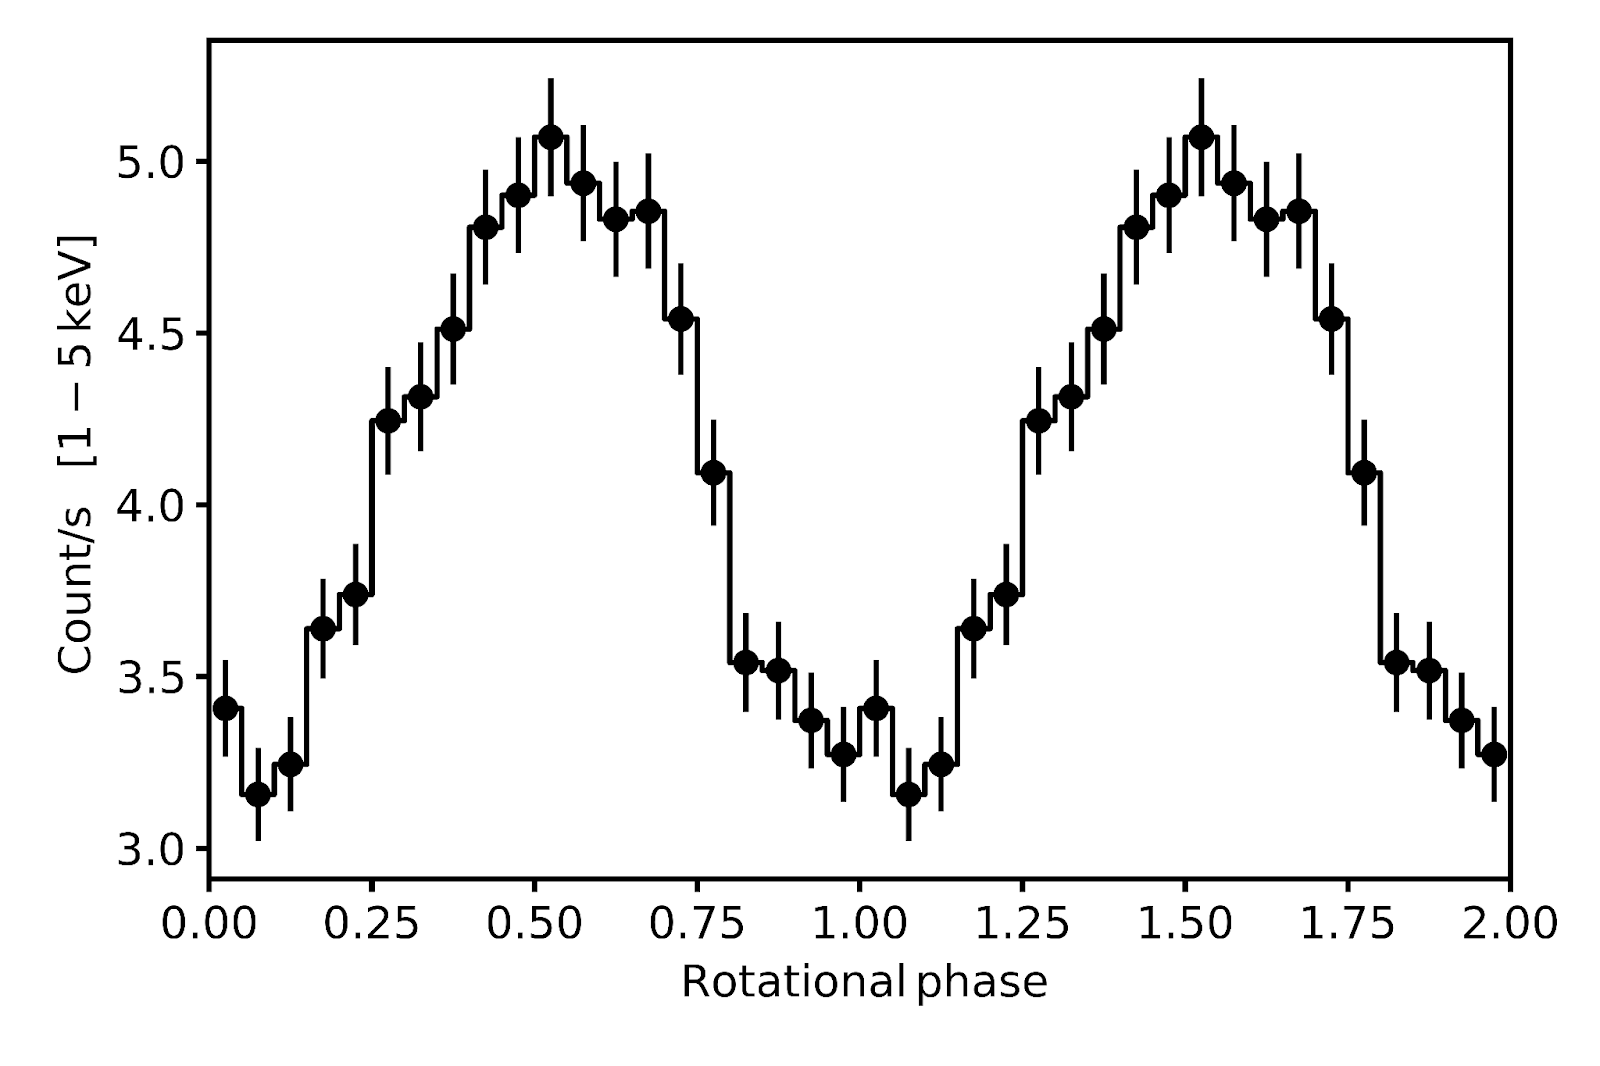 NICER X-ray count rate as a function of rotation phase for the magnetar 1E 1547.0-0548, in the 1-5 keV photon energy band. Two rotation cycles are shown (same data plotted twice) for clarity.